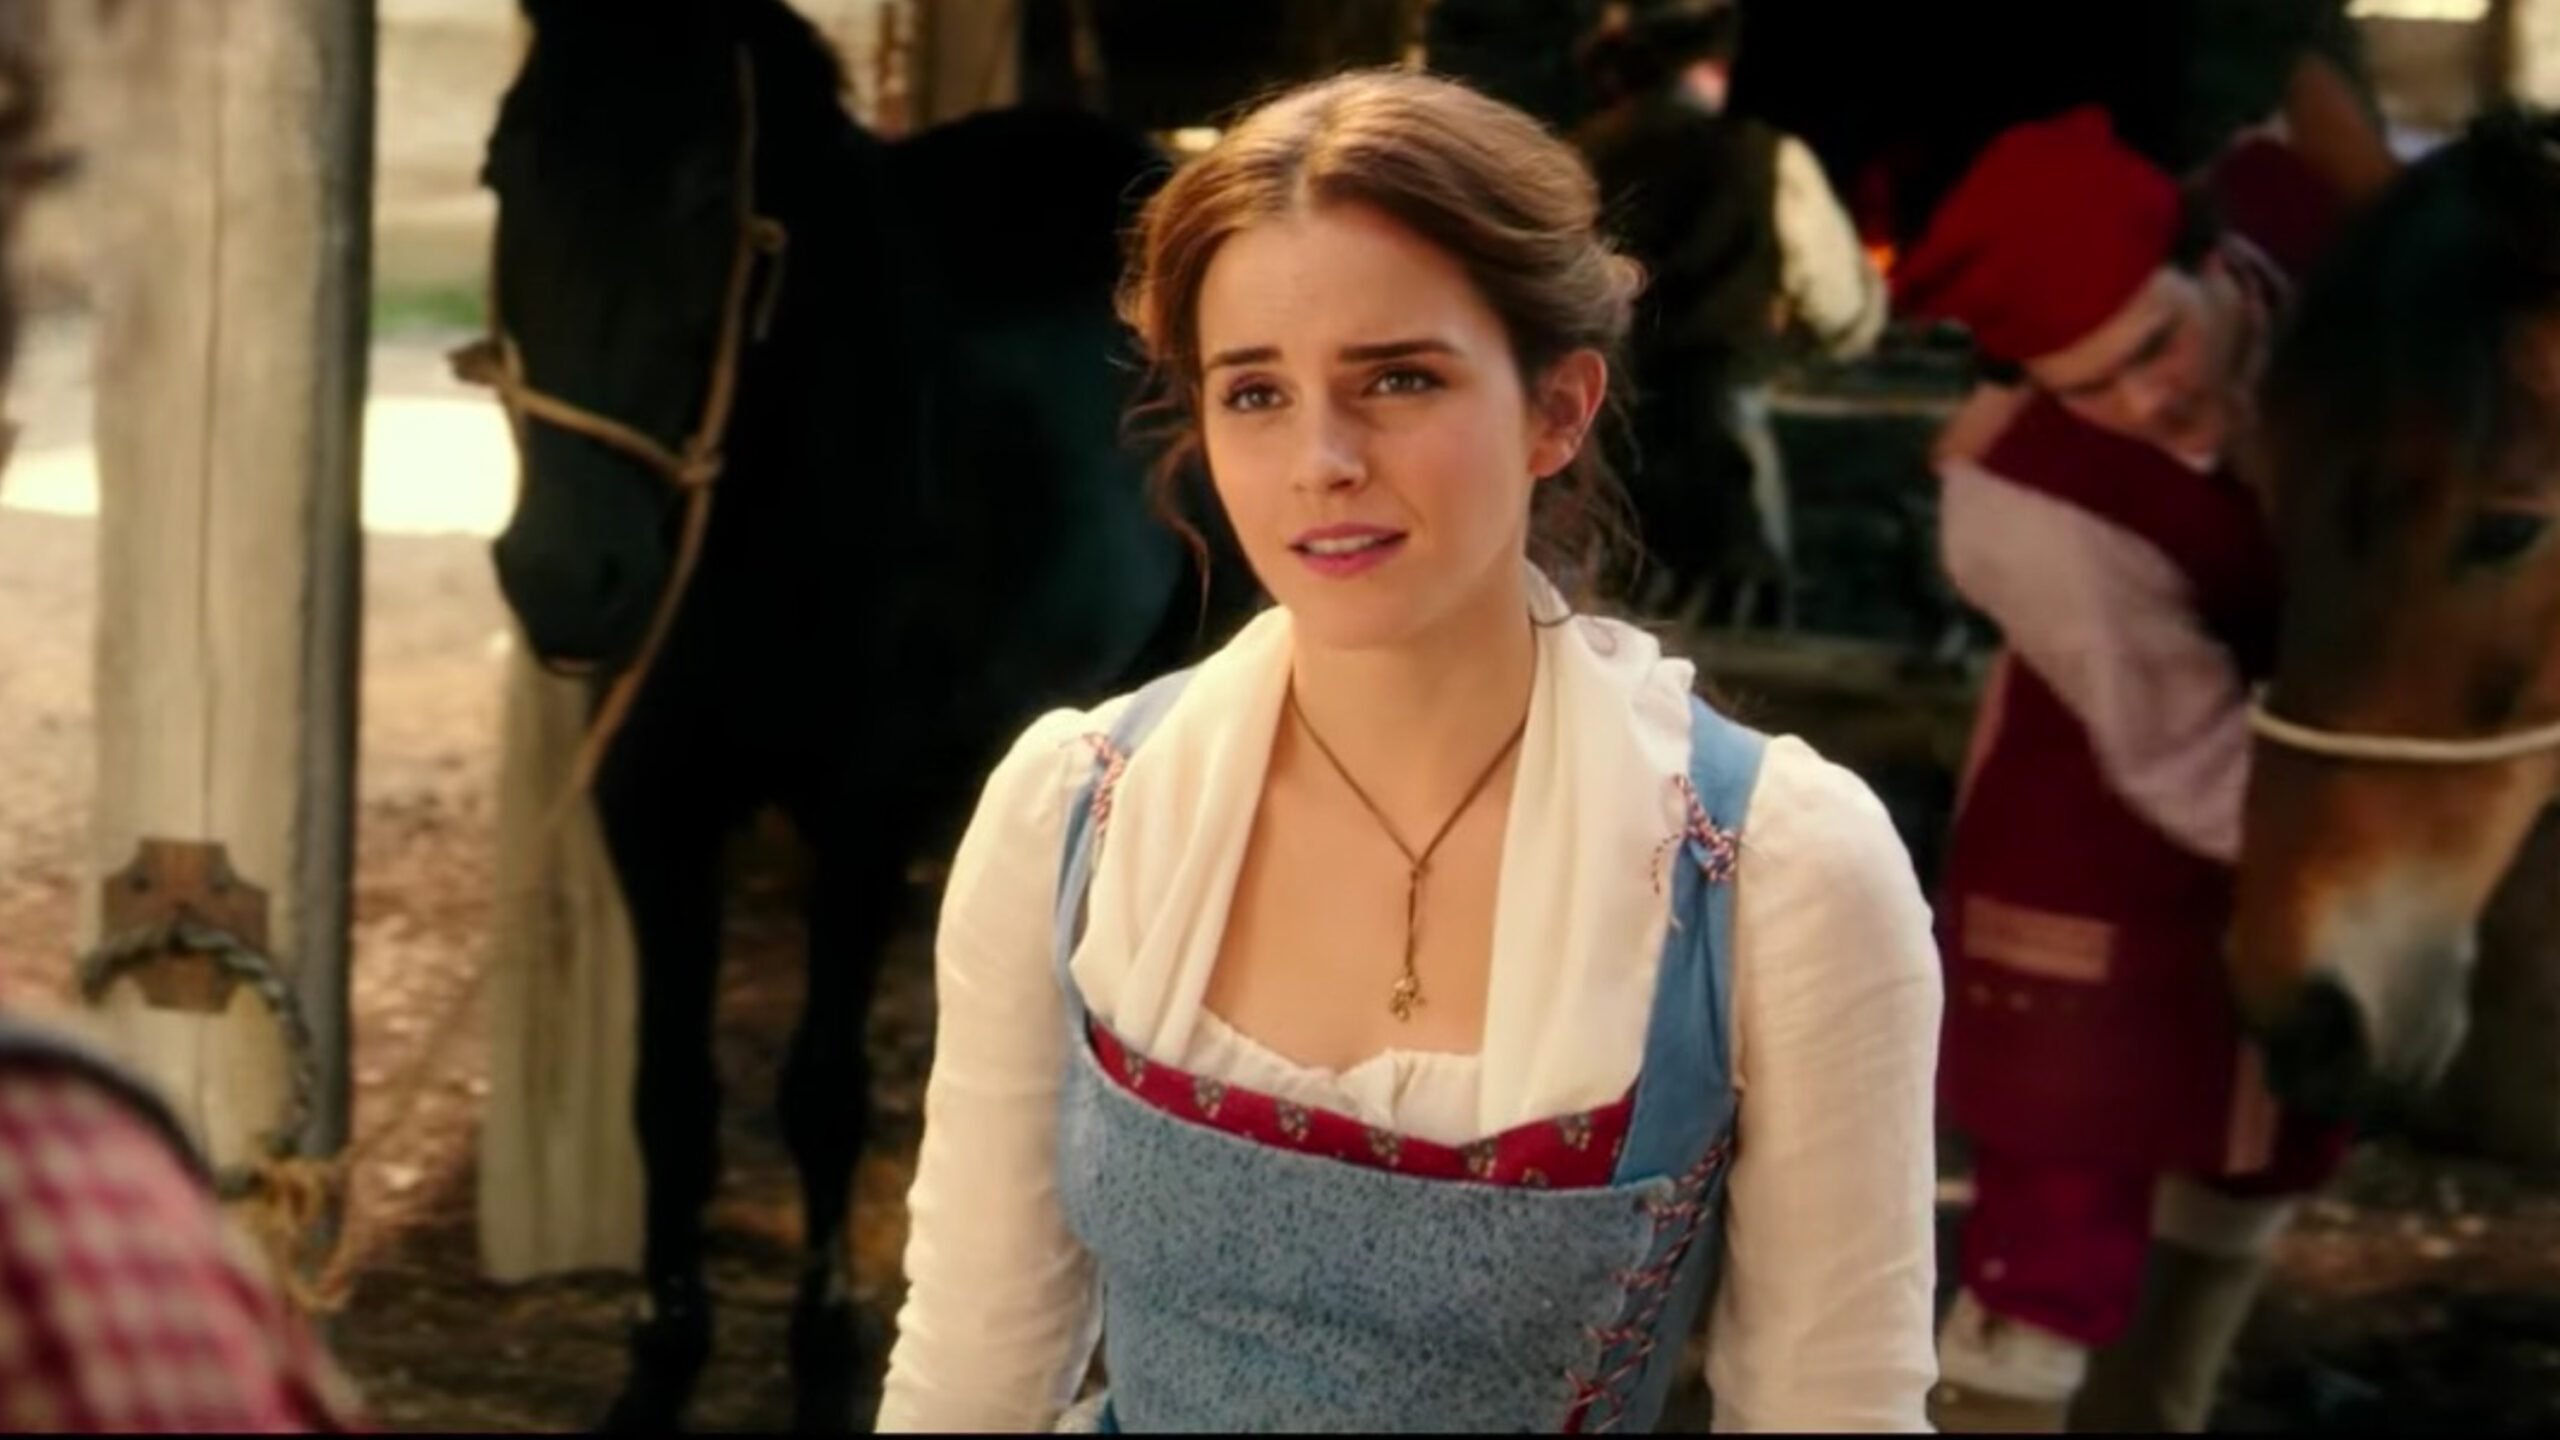 WATCH: ‘Beauty and the Beast’ cast sing ‘Belle’ in new clip